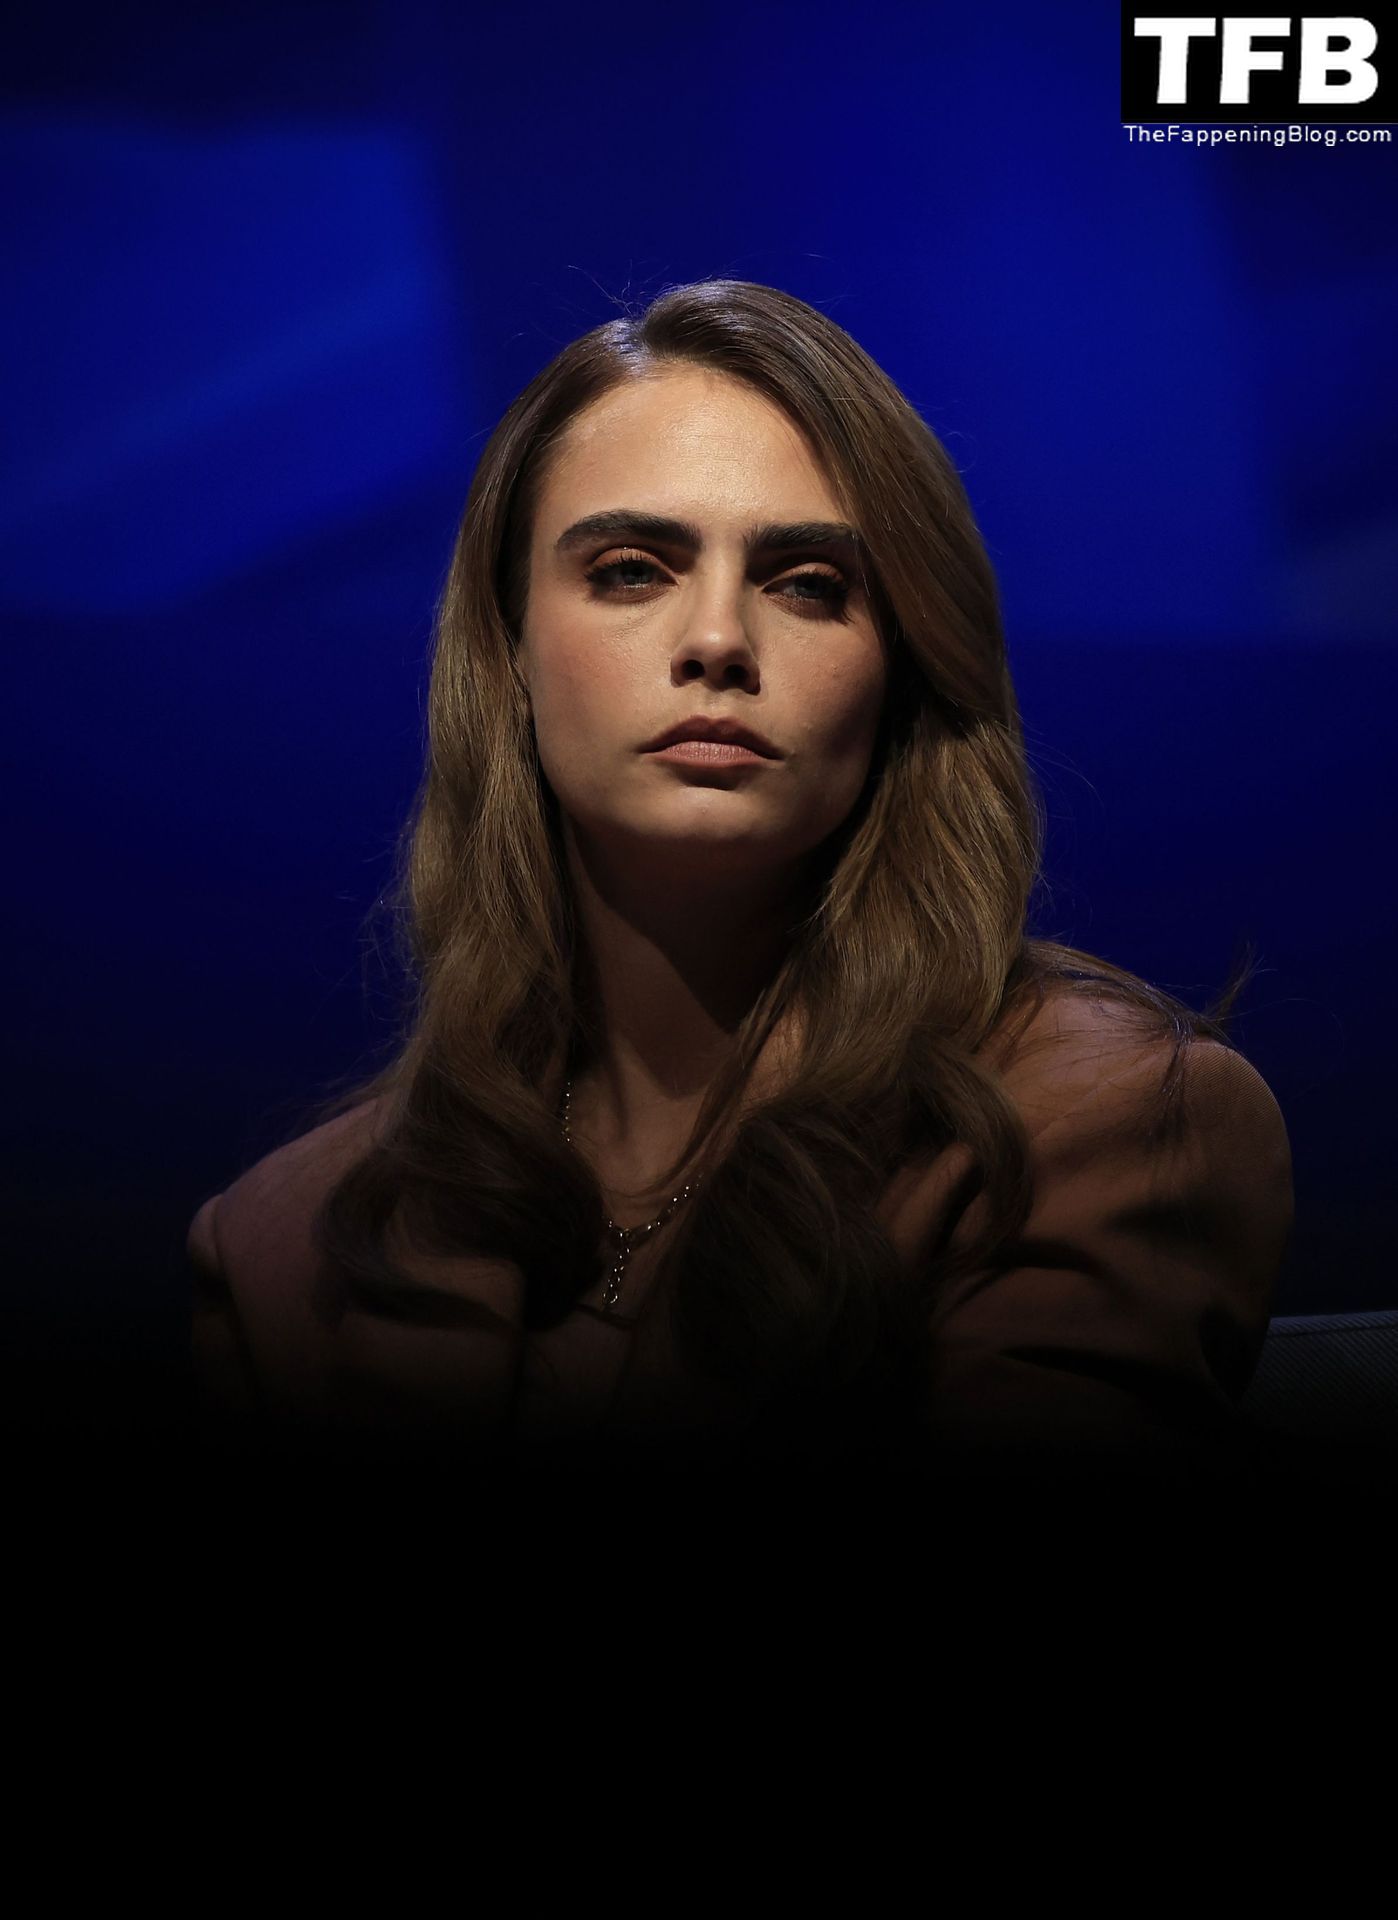 Cara-Delevingne-Sexy-The-Fappening-Blog-10-2.jpg